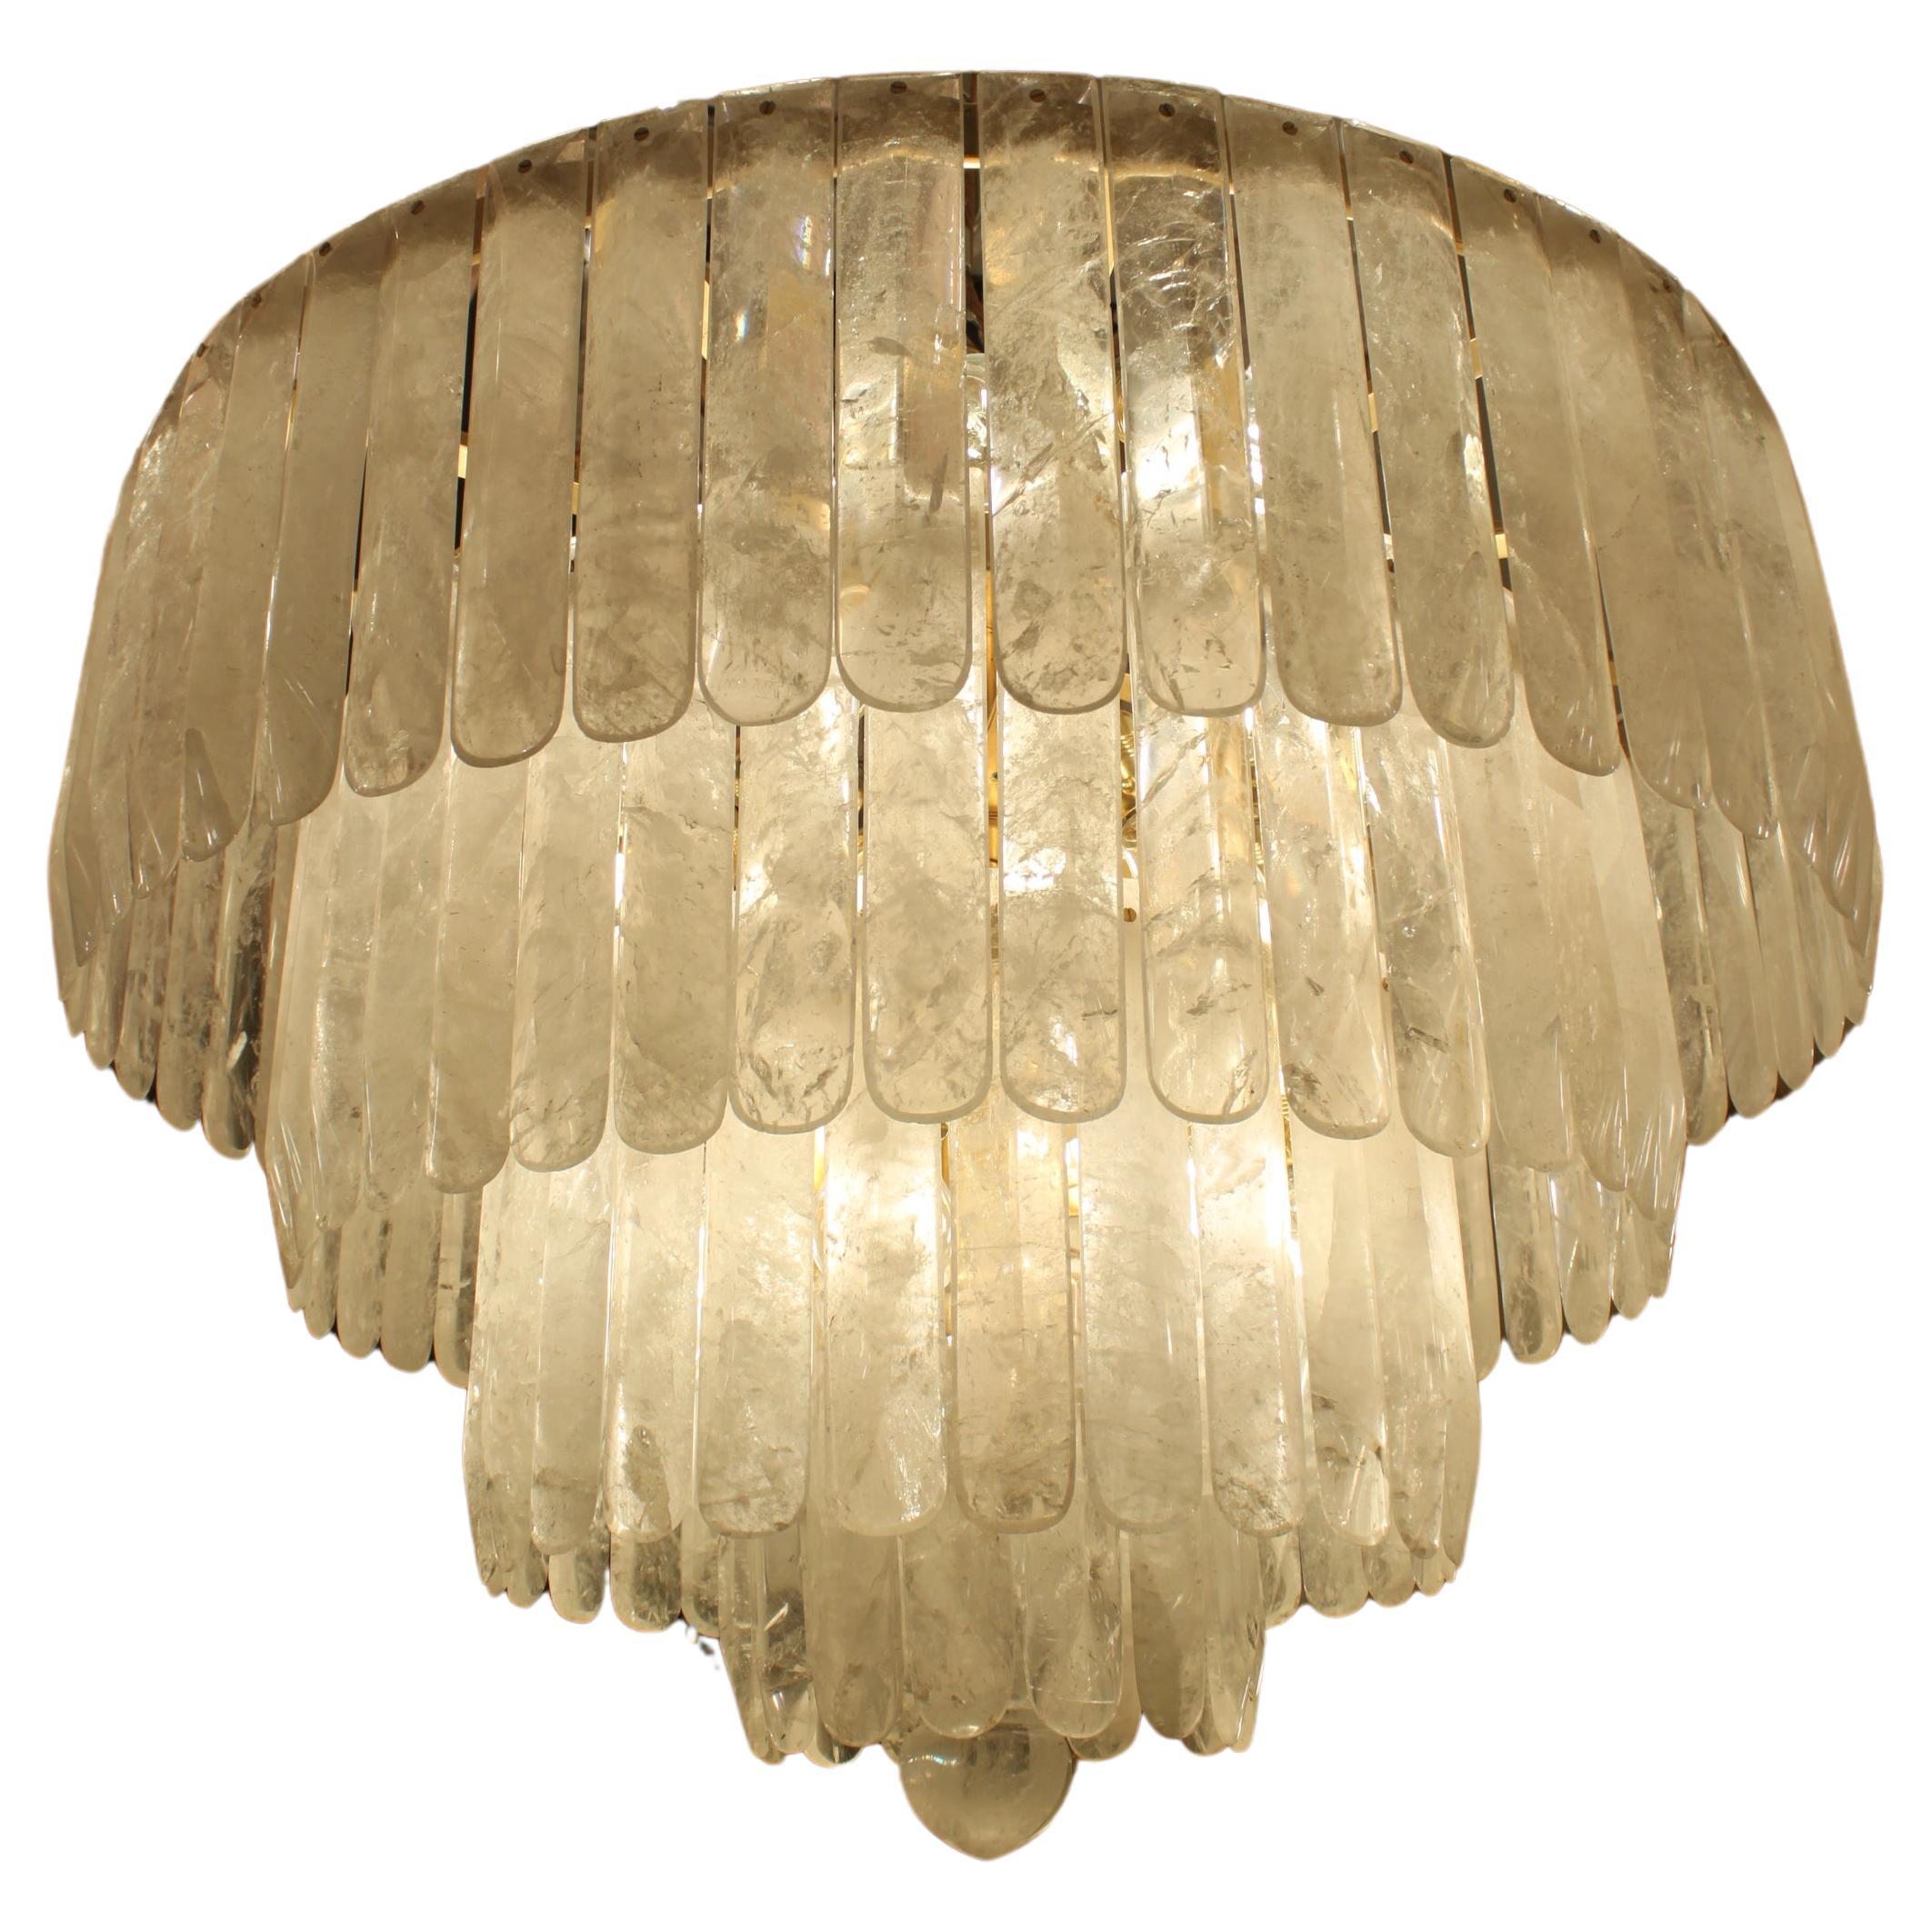 A beautiful pair of rock crystal chandeliers comprising 4 bronze circular reducing tiers each profusely hung with a total of 135 individually hand carved rock crystal drops. A beautiful solid rock crystal pear drop hangs below to add a finishing